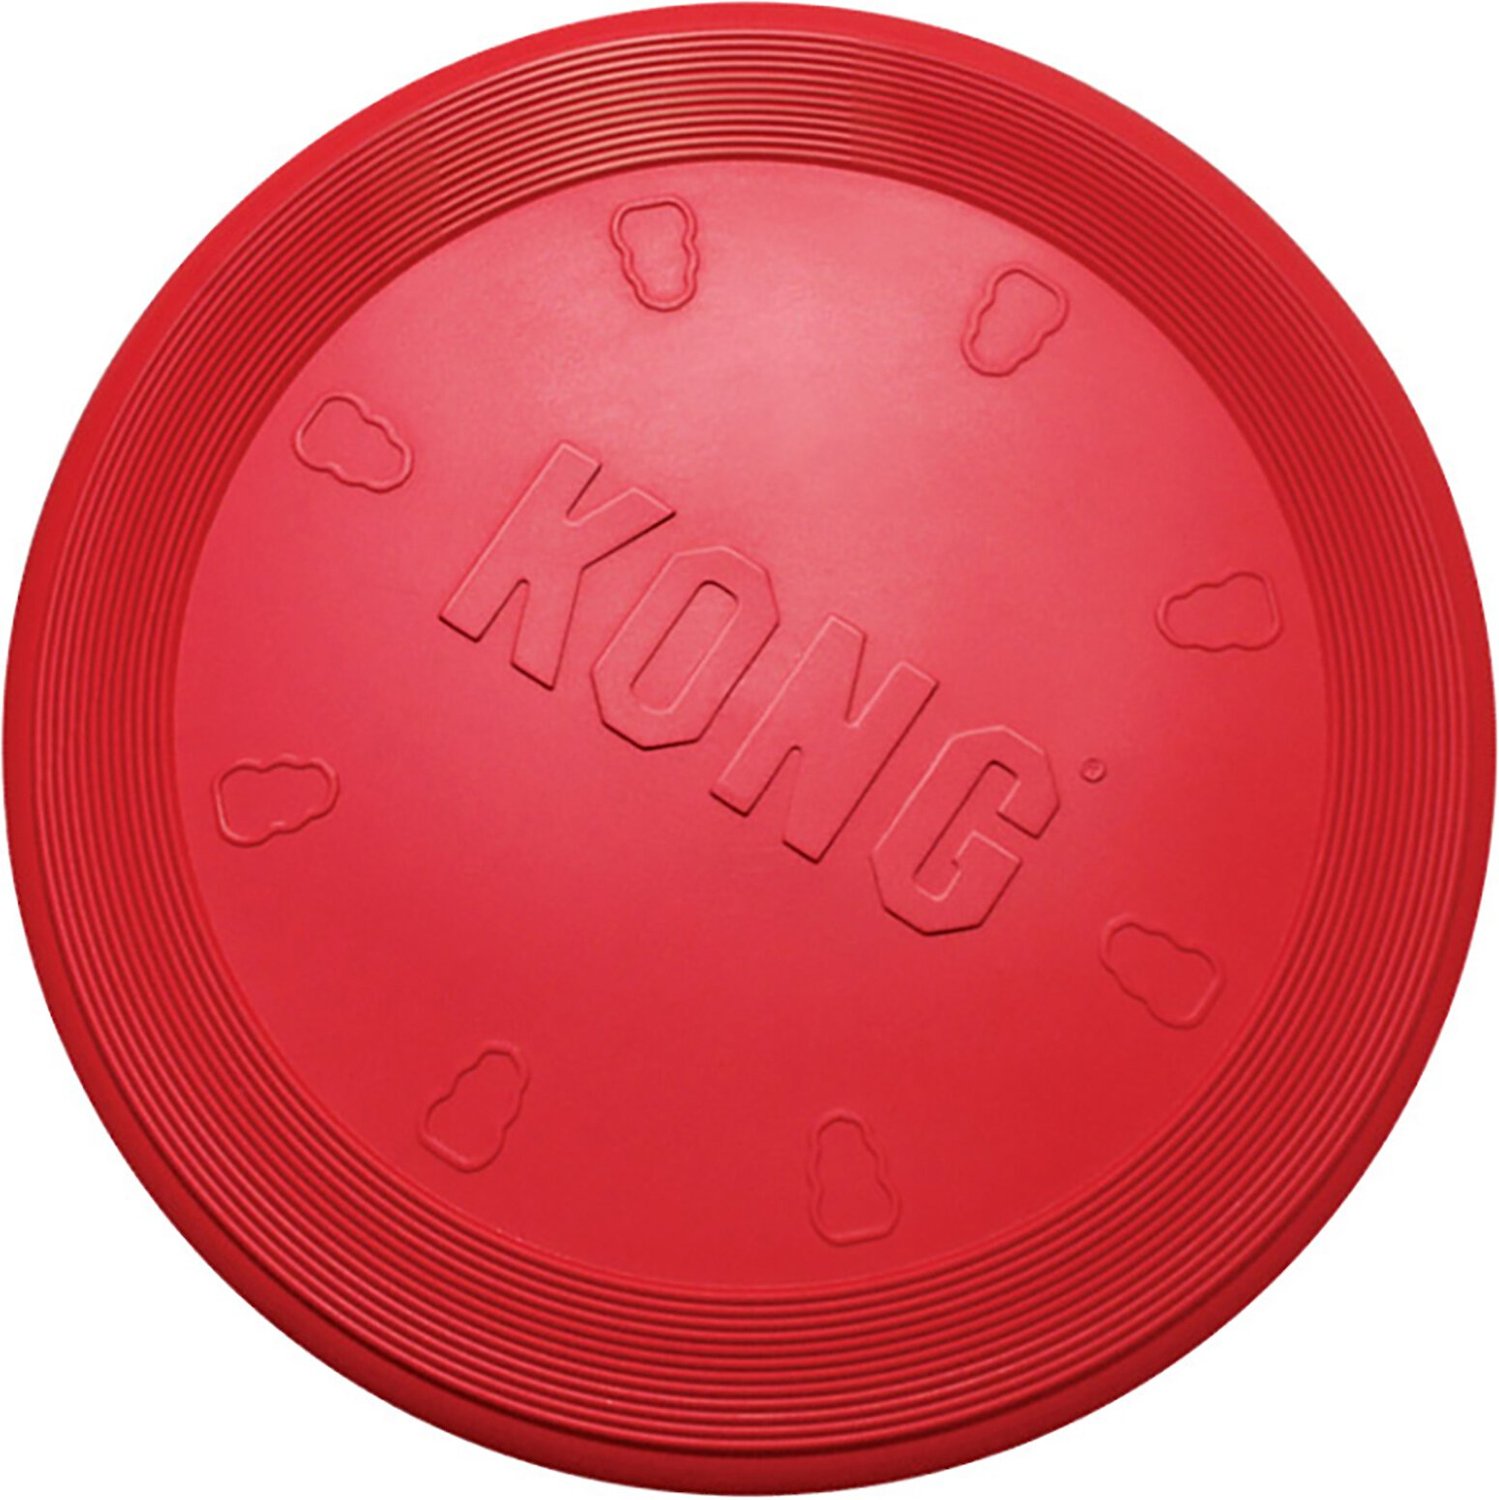 KONG Classic Flyer Dog Toy